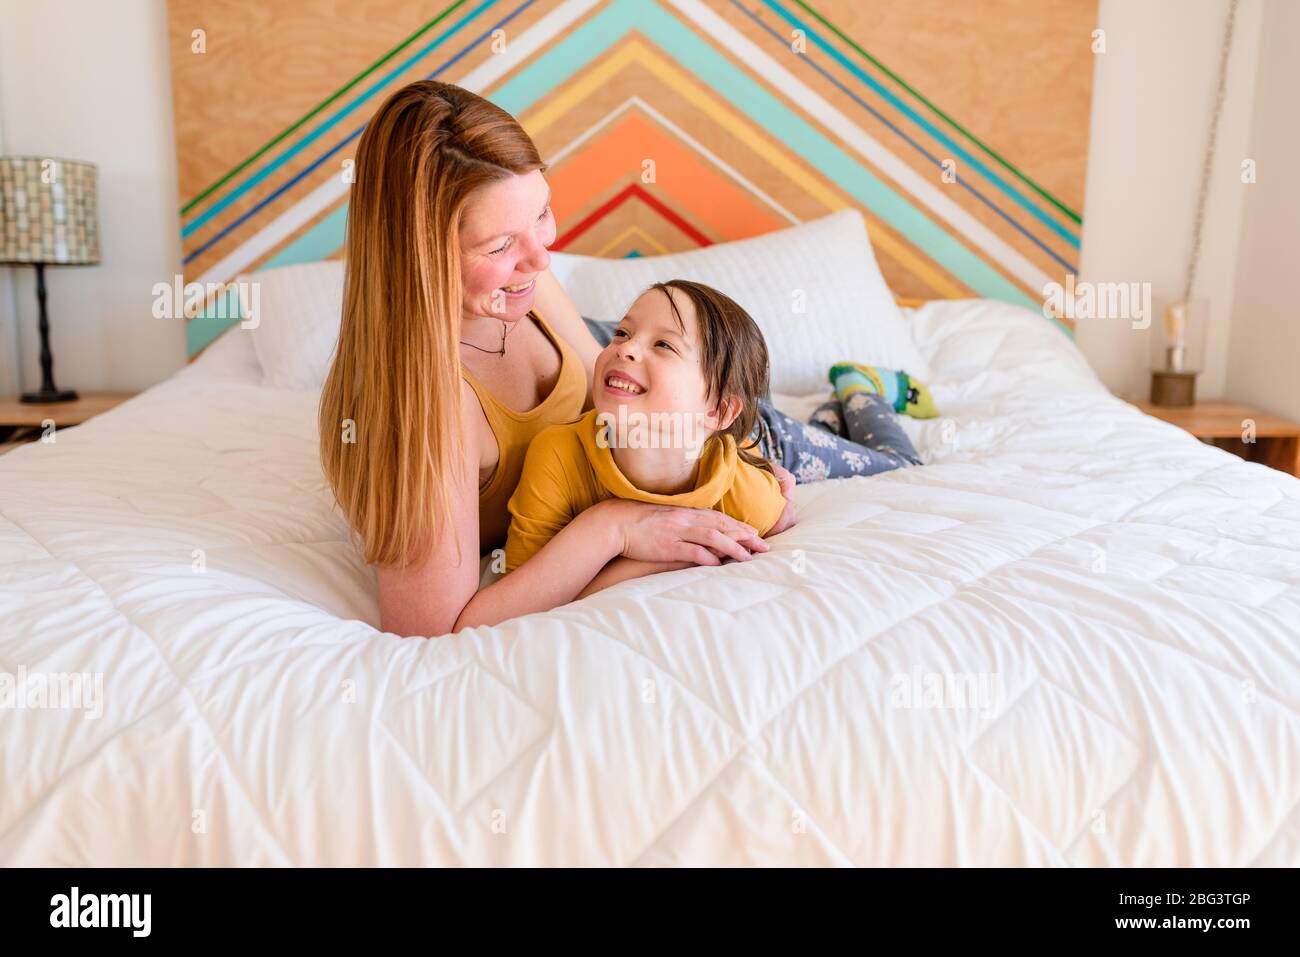 Mother and daughter lying on a bed laughing Stock Photo